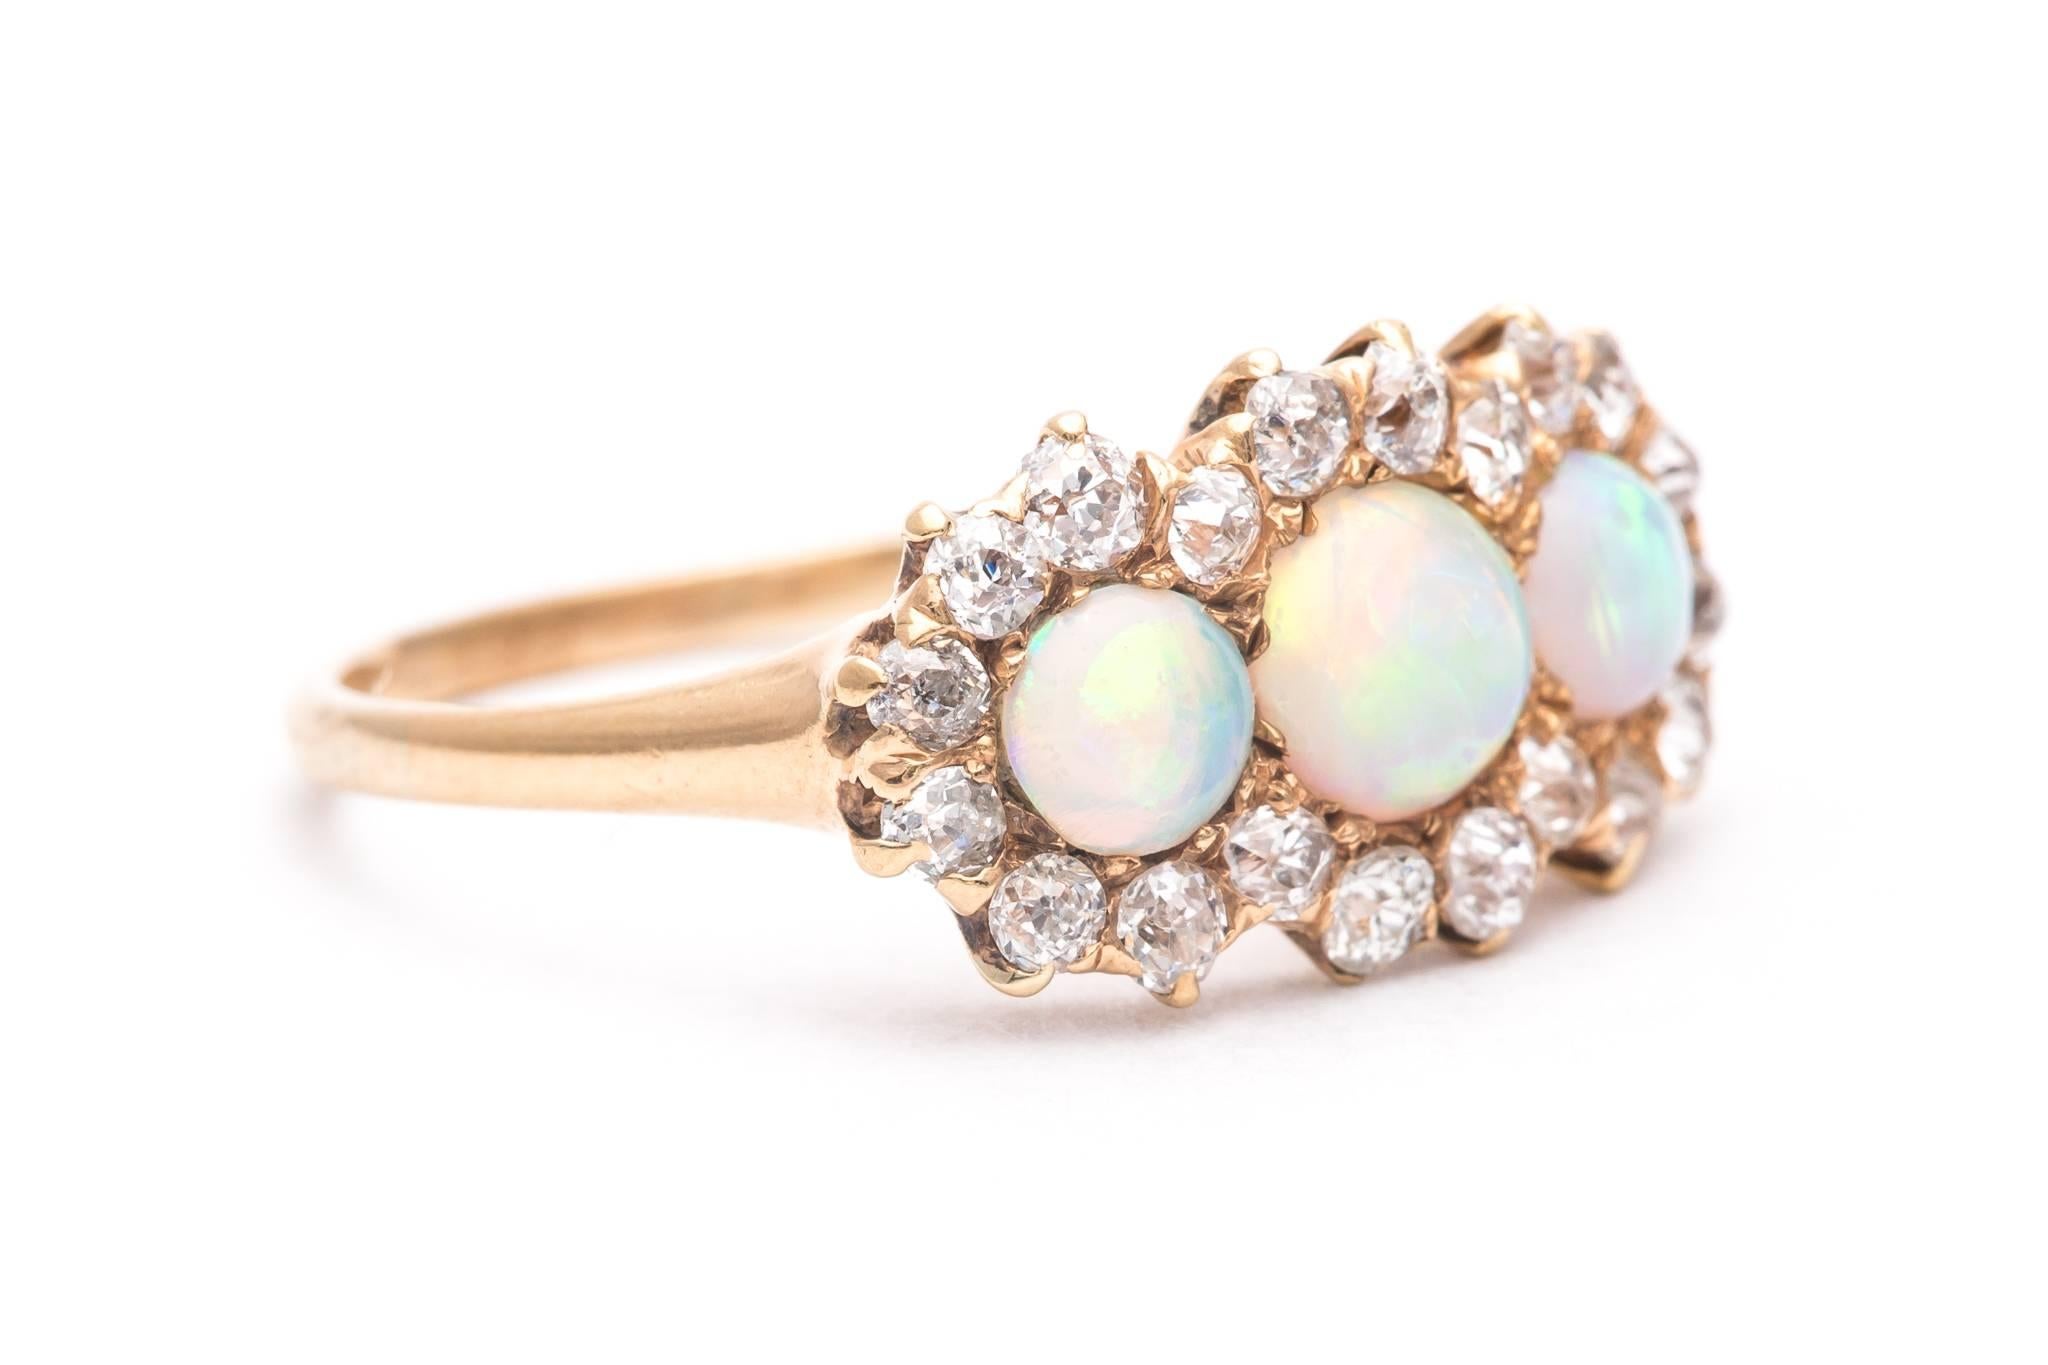 A beautiful victorian period opal, and diamond ring in 18 karat yellow gold.  Centered by a trio of rainbow like Australian opals this ring features a halo of antique mine cut diamonds surrounding the opals.

Of beautiful quality, the opals show a